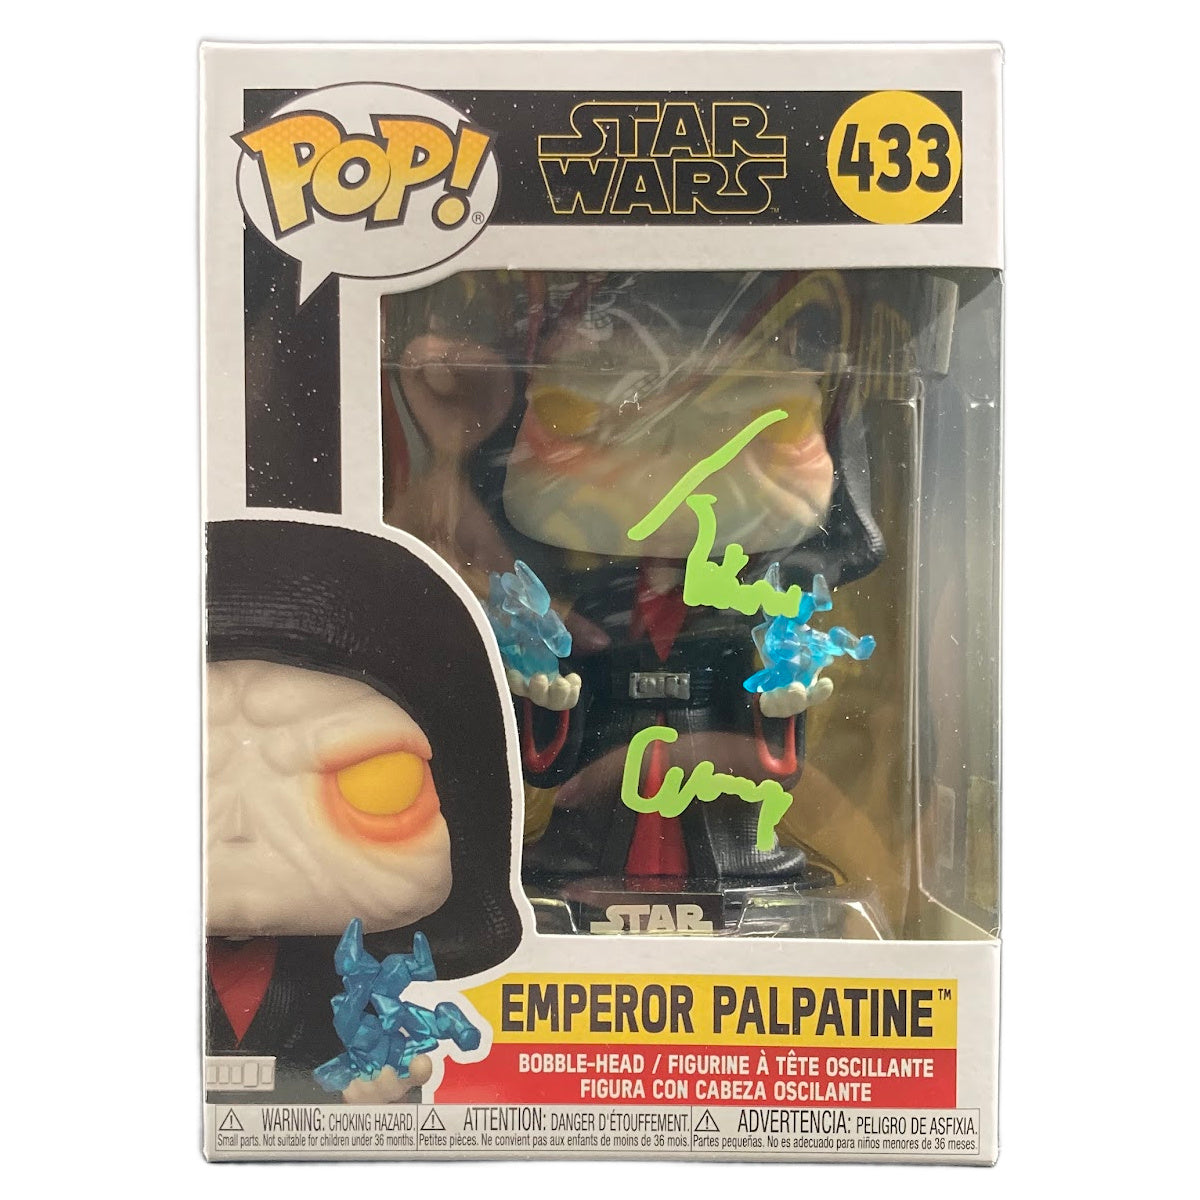 Tim Curry Signed Funko POP Star Wars Emperor Palpatine Authentic Autographed JSA COA